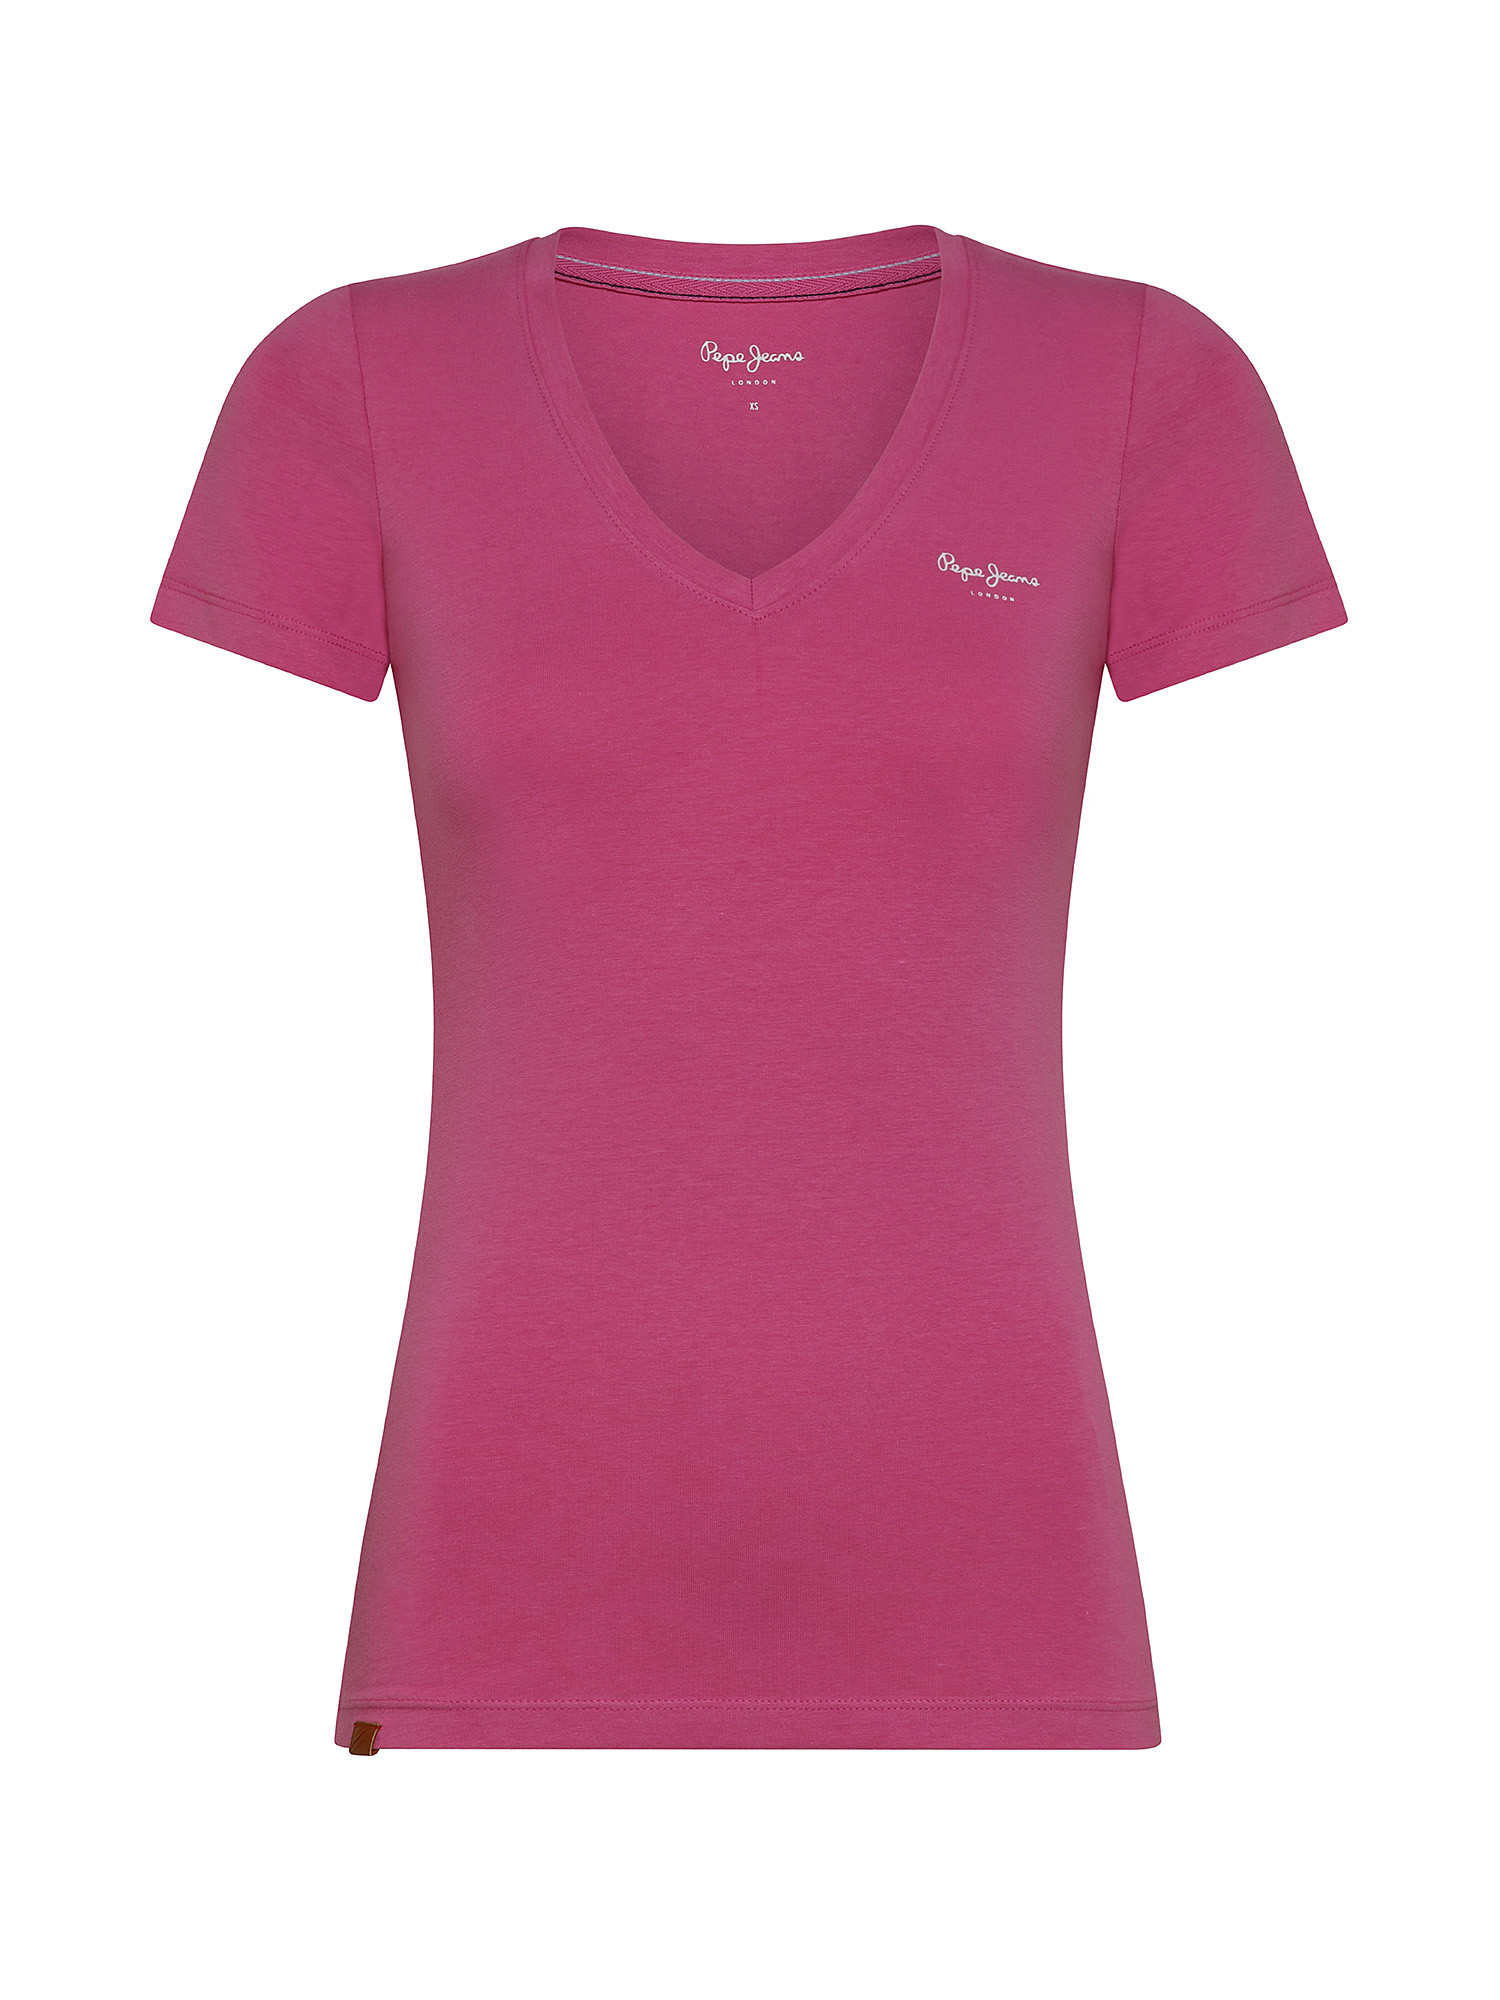 T-shirt Violette in cotone, Rosa fenicottero, large image number 0